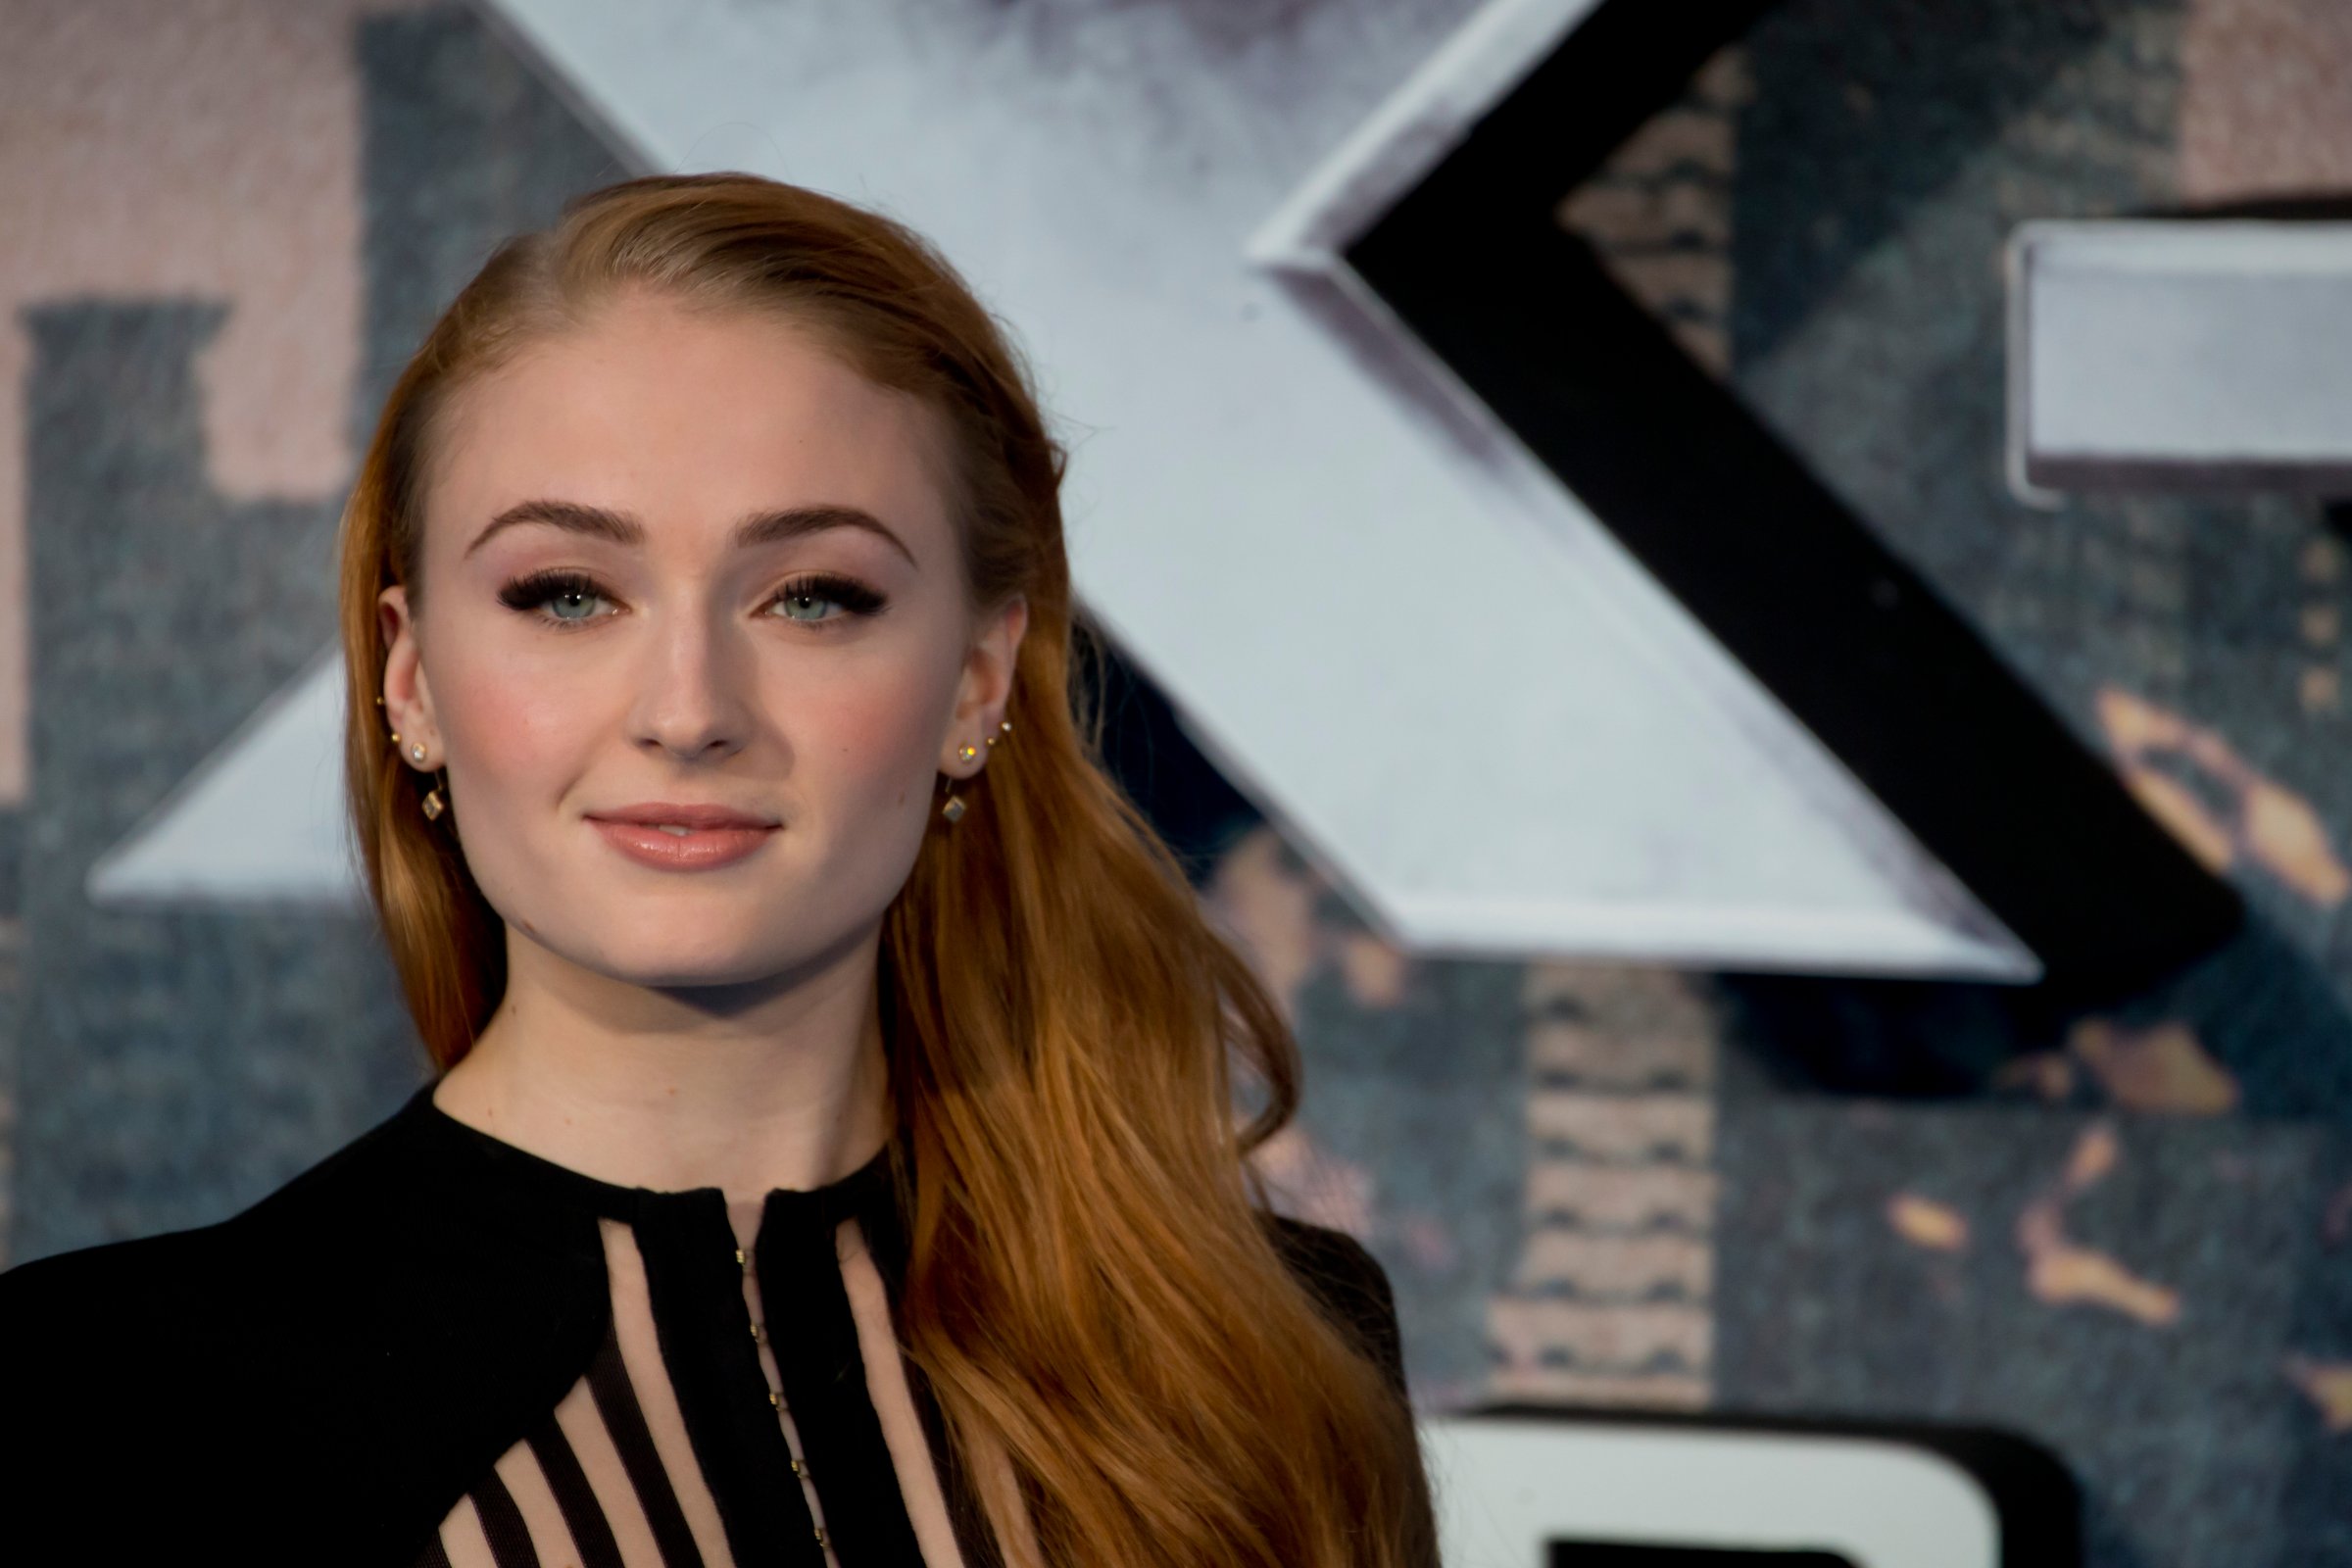 Sophie Turner attends a Global Fan Screening of 'X-Men Apocalypse' at BFI IMAX on May 9, 2016 in London, England.